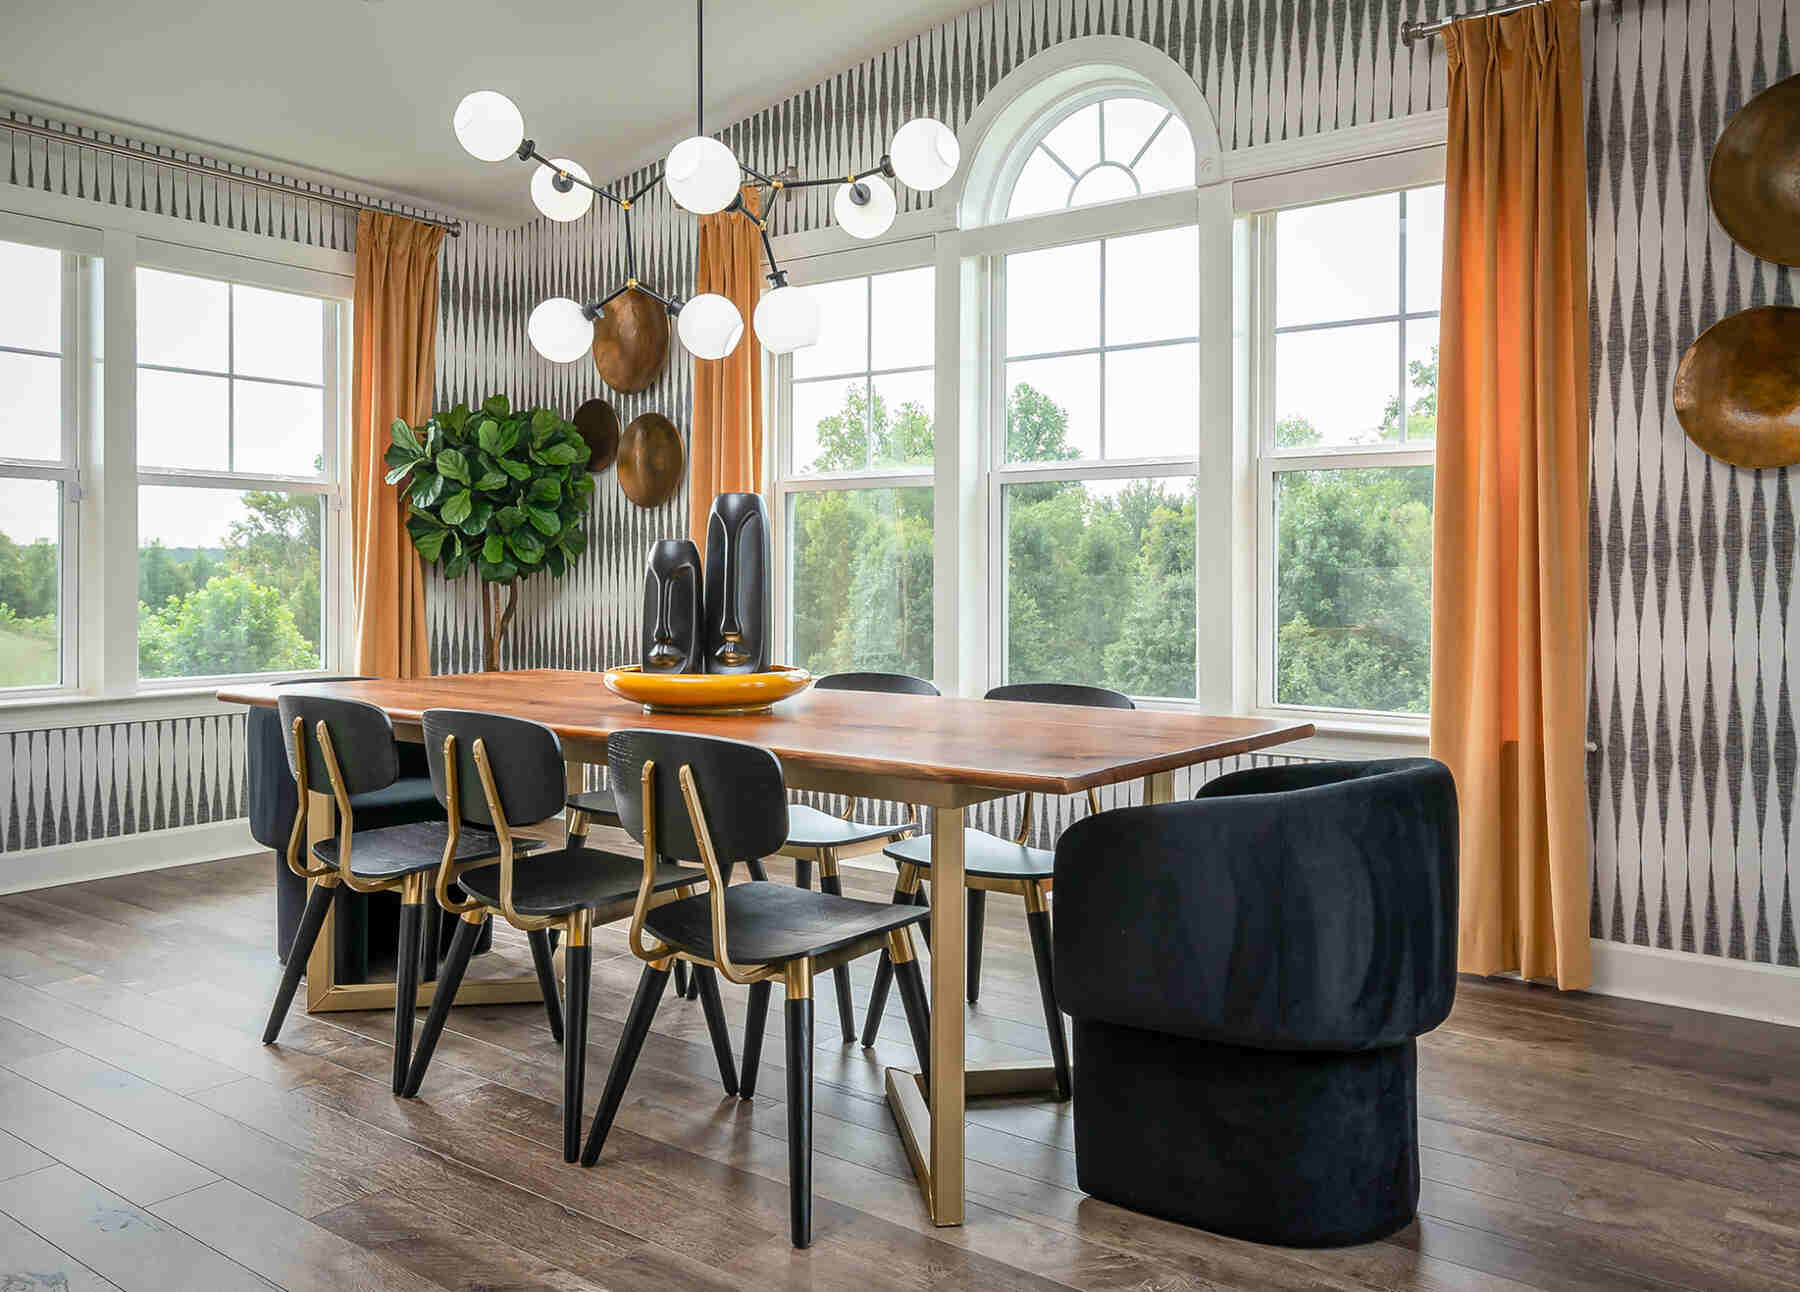 Wooden dining table, with black and gold chairs and low hanging light fixtures